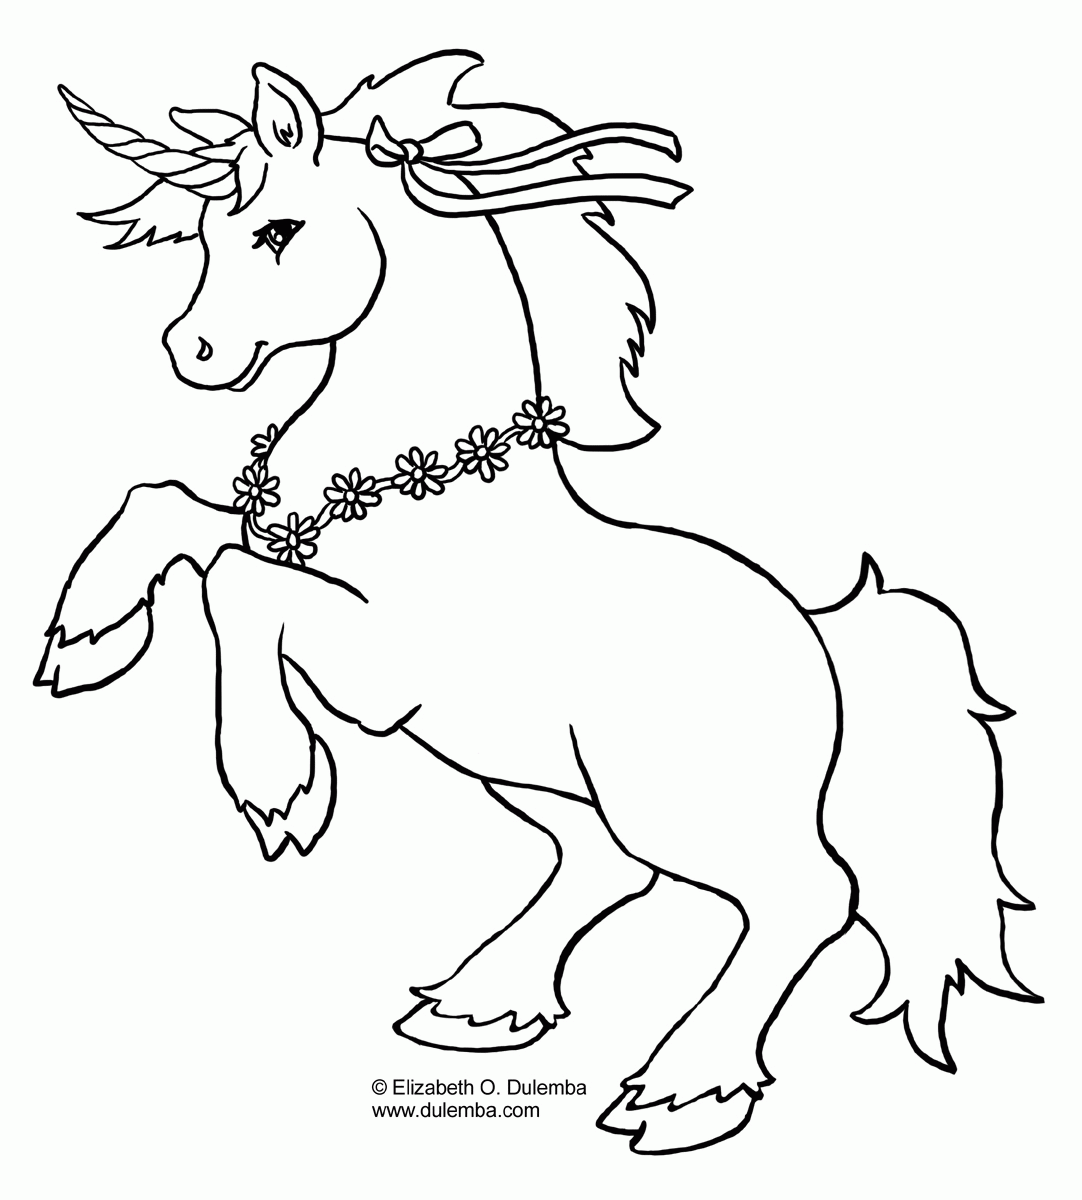 Download Printable Unicorn Coloring Page Coloring Home